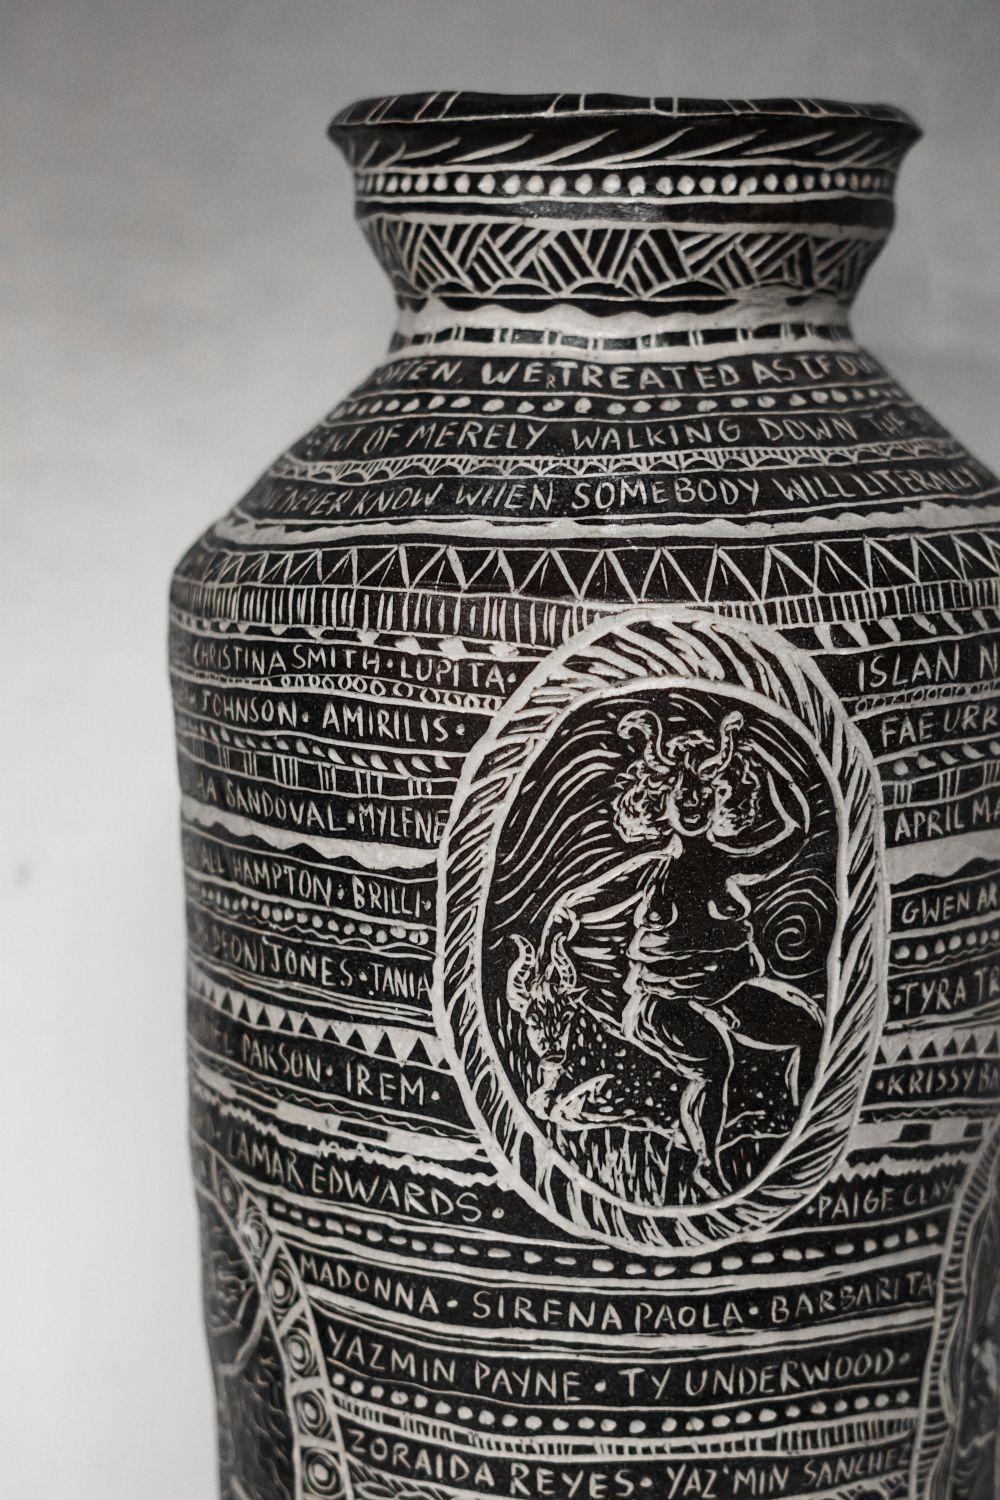 Tribute to Astarte and Her Spirit of Tenacity. Large Carved Porcelain Vase - Black Figurative Sculpture by Alex Hodge